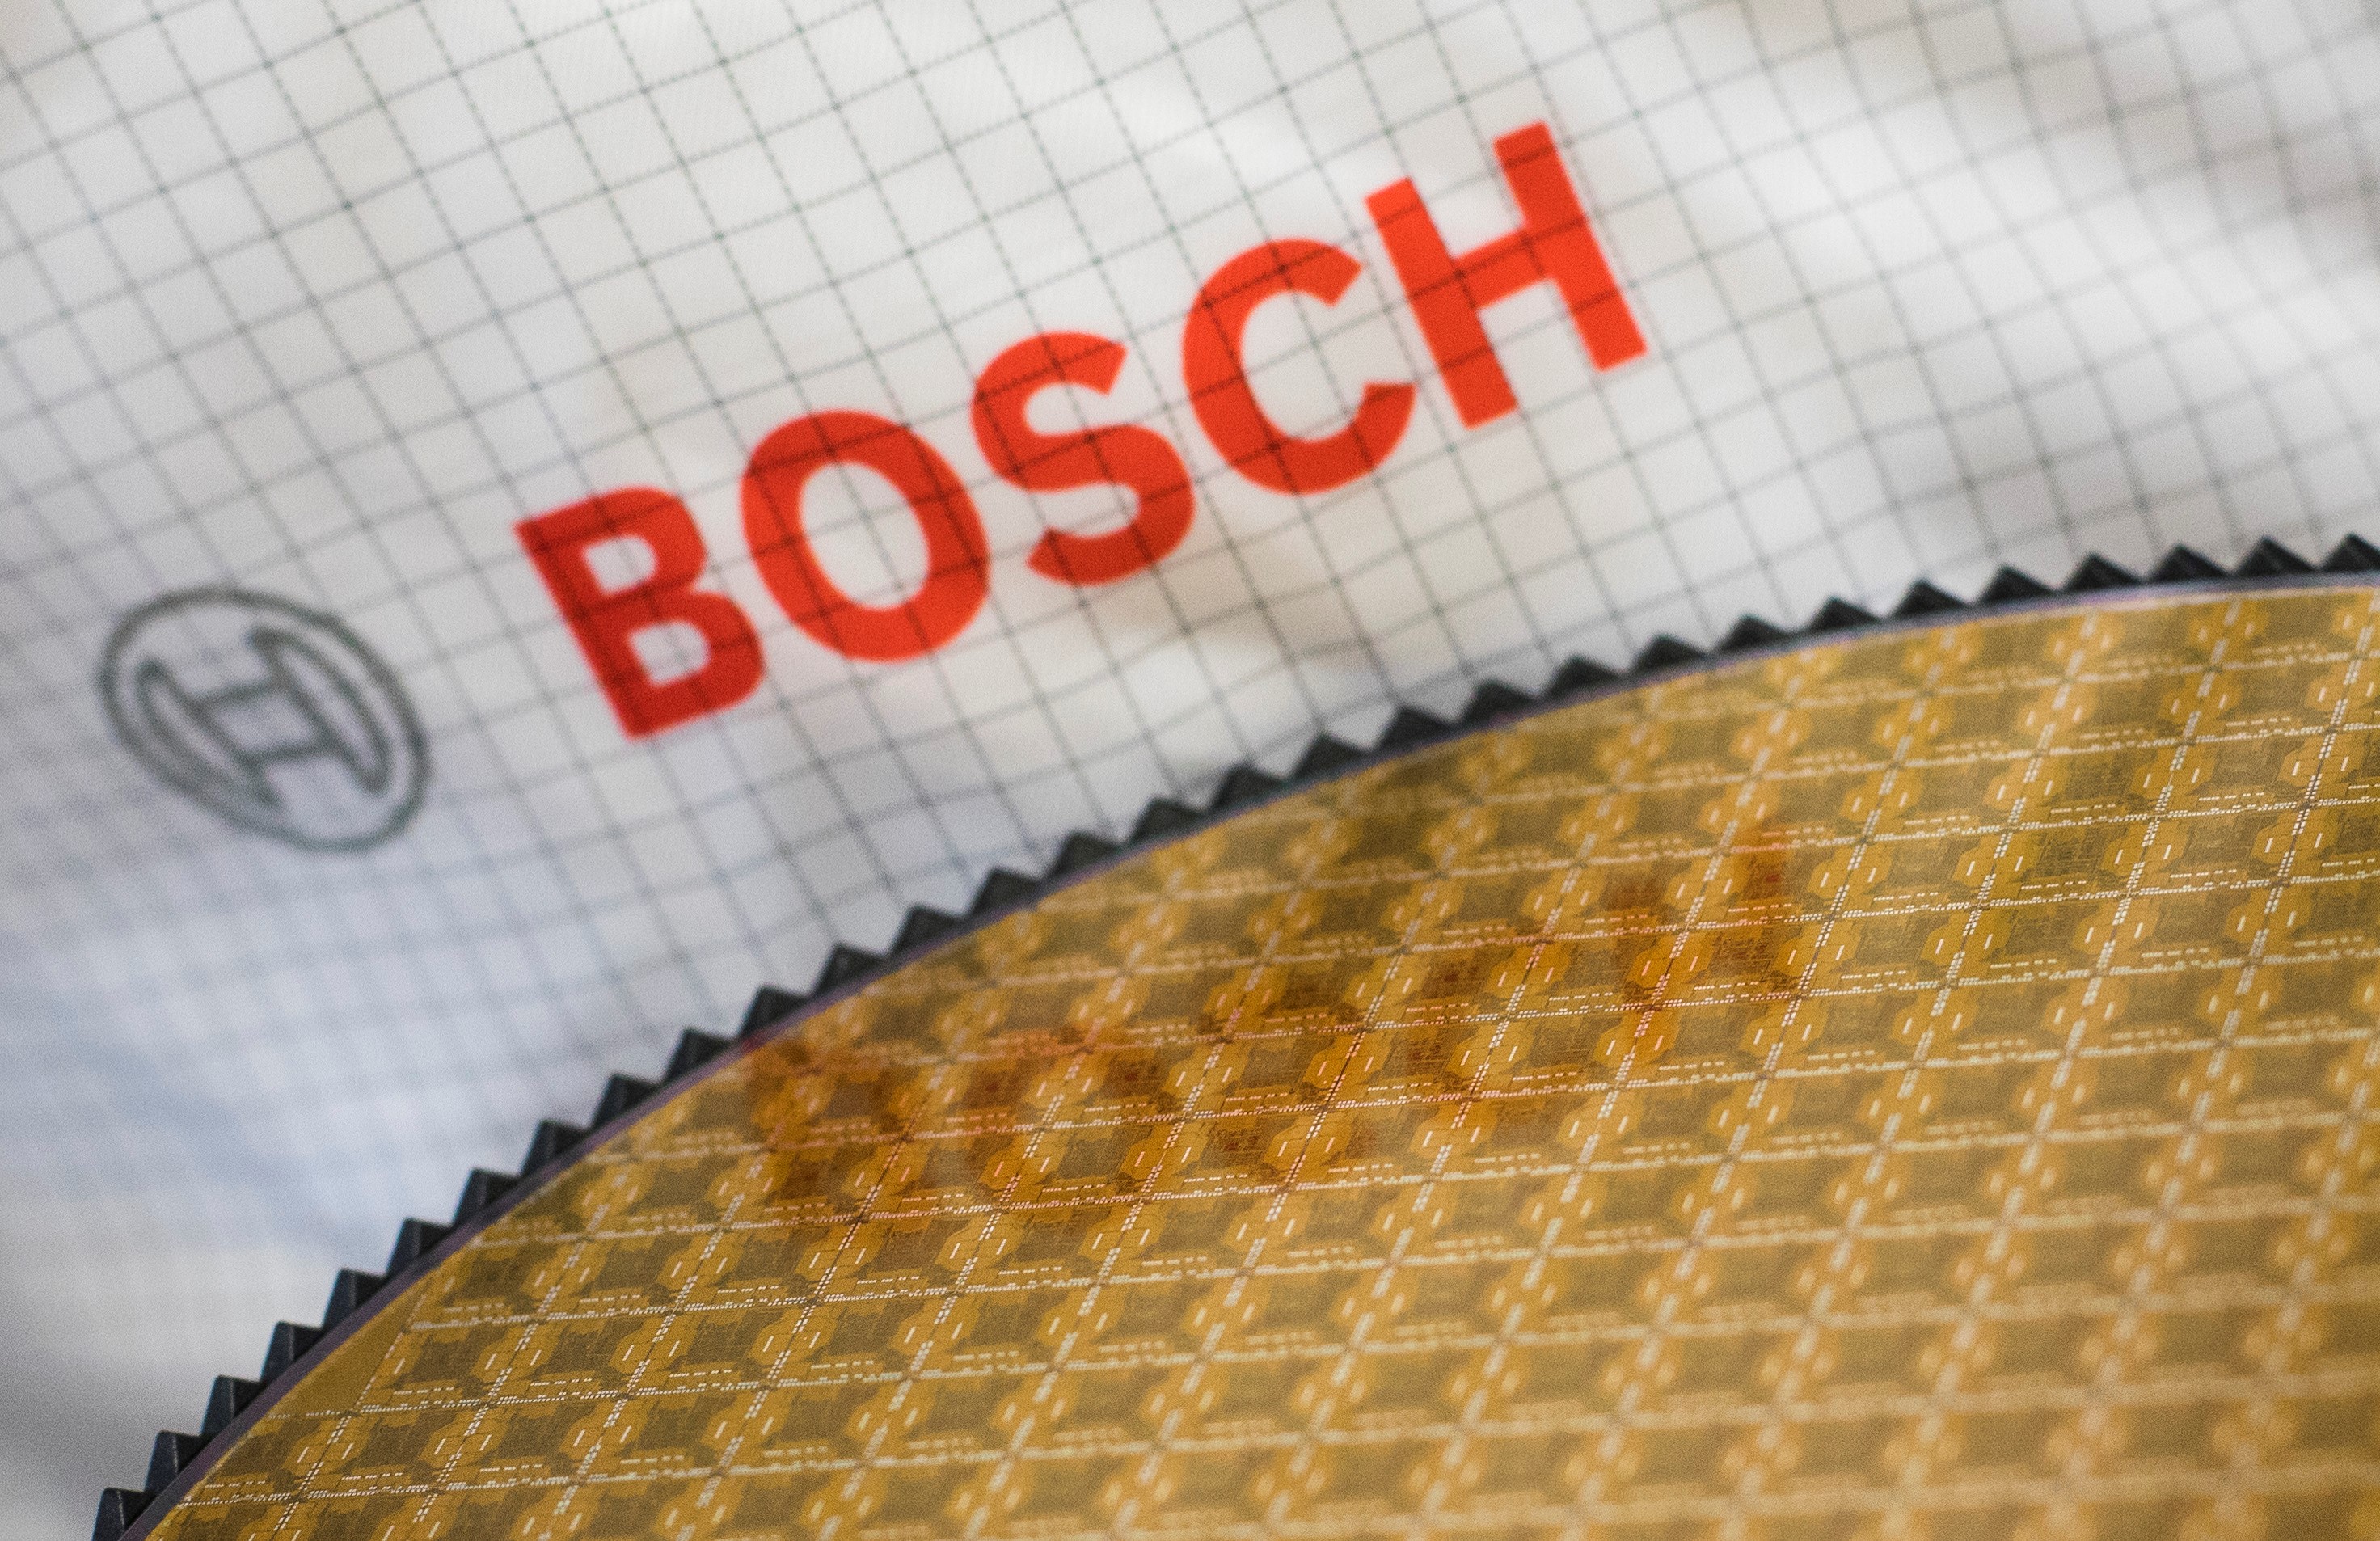 Semiconductors – market of the future: Bosch is growing faster than the market